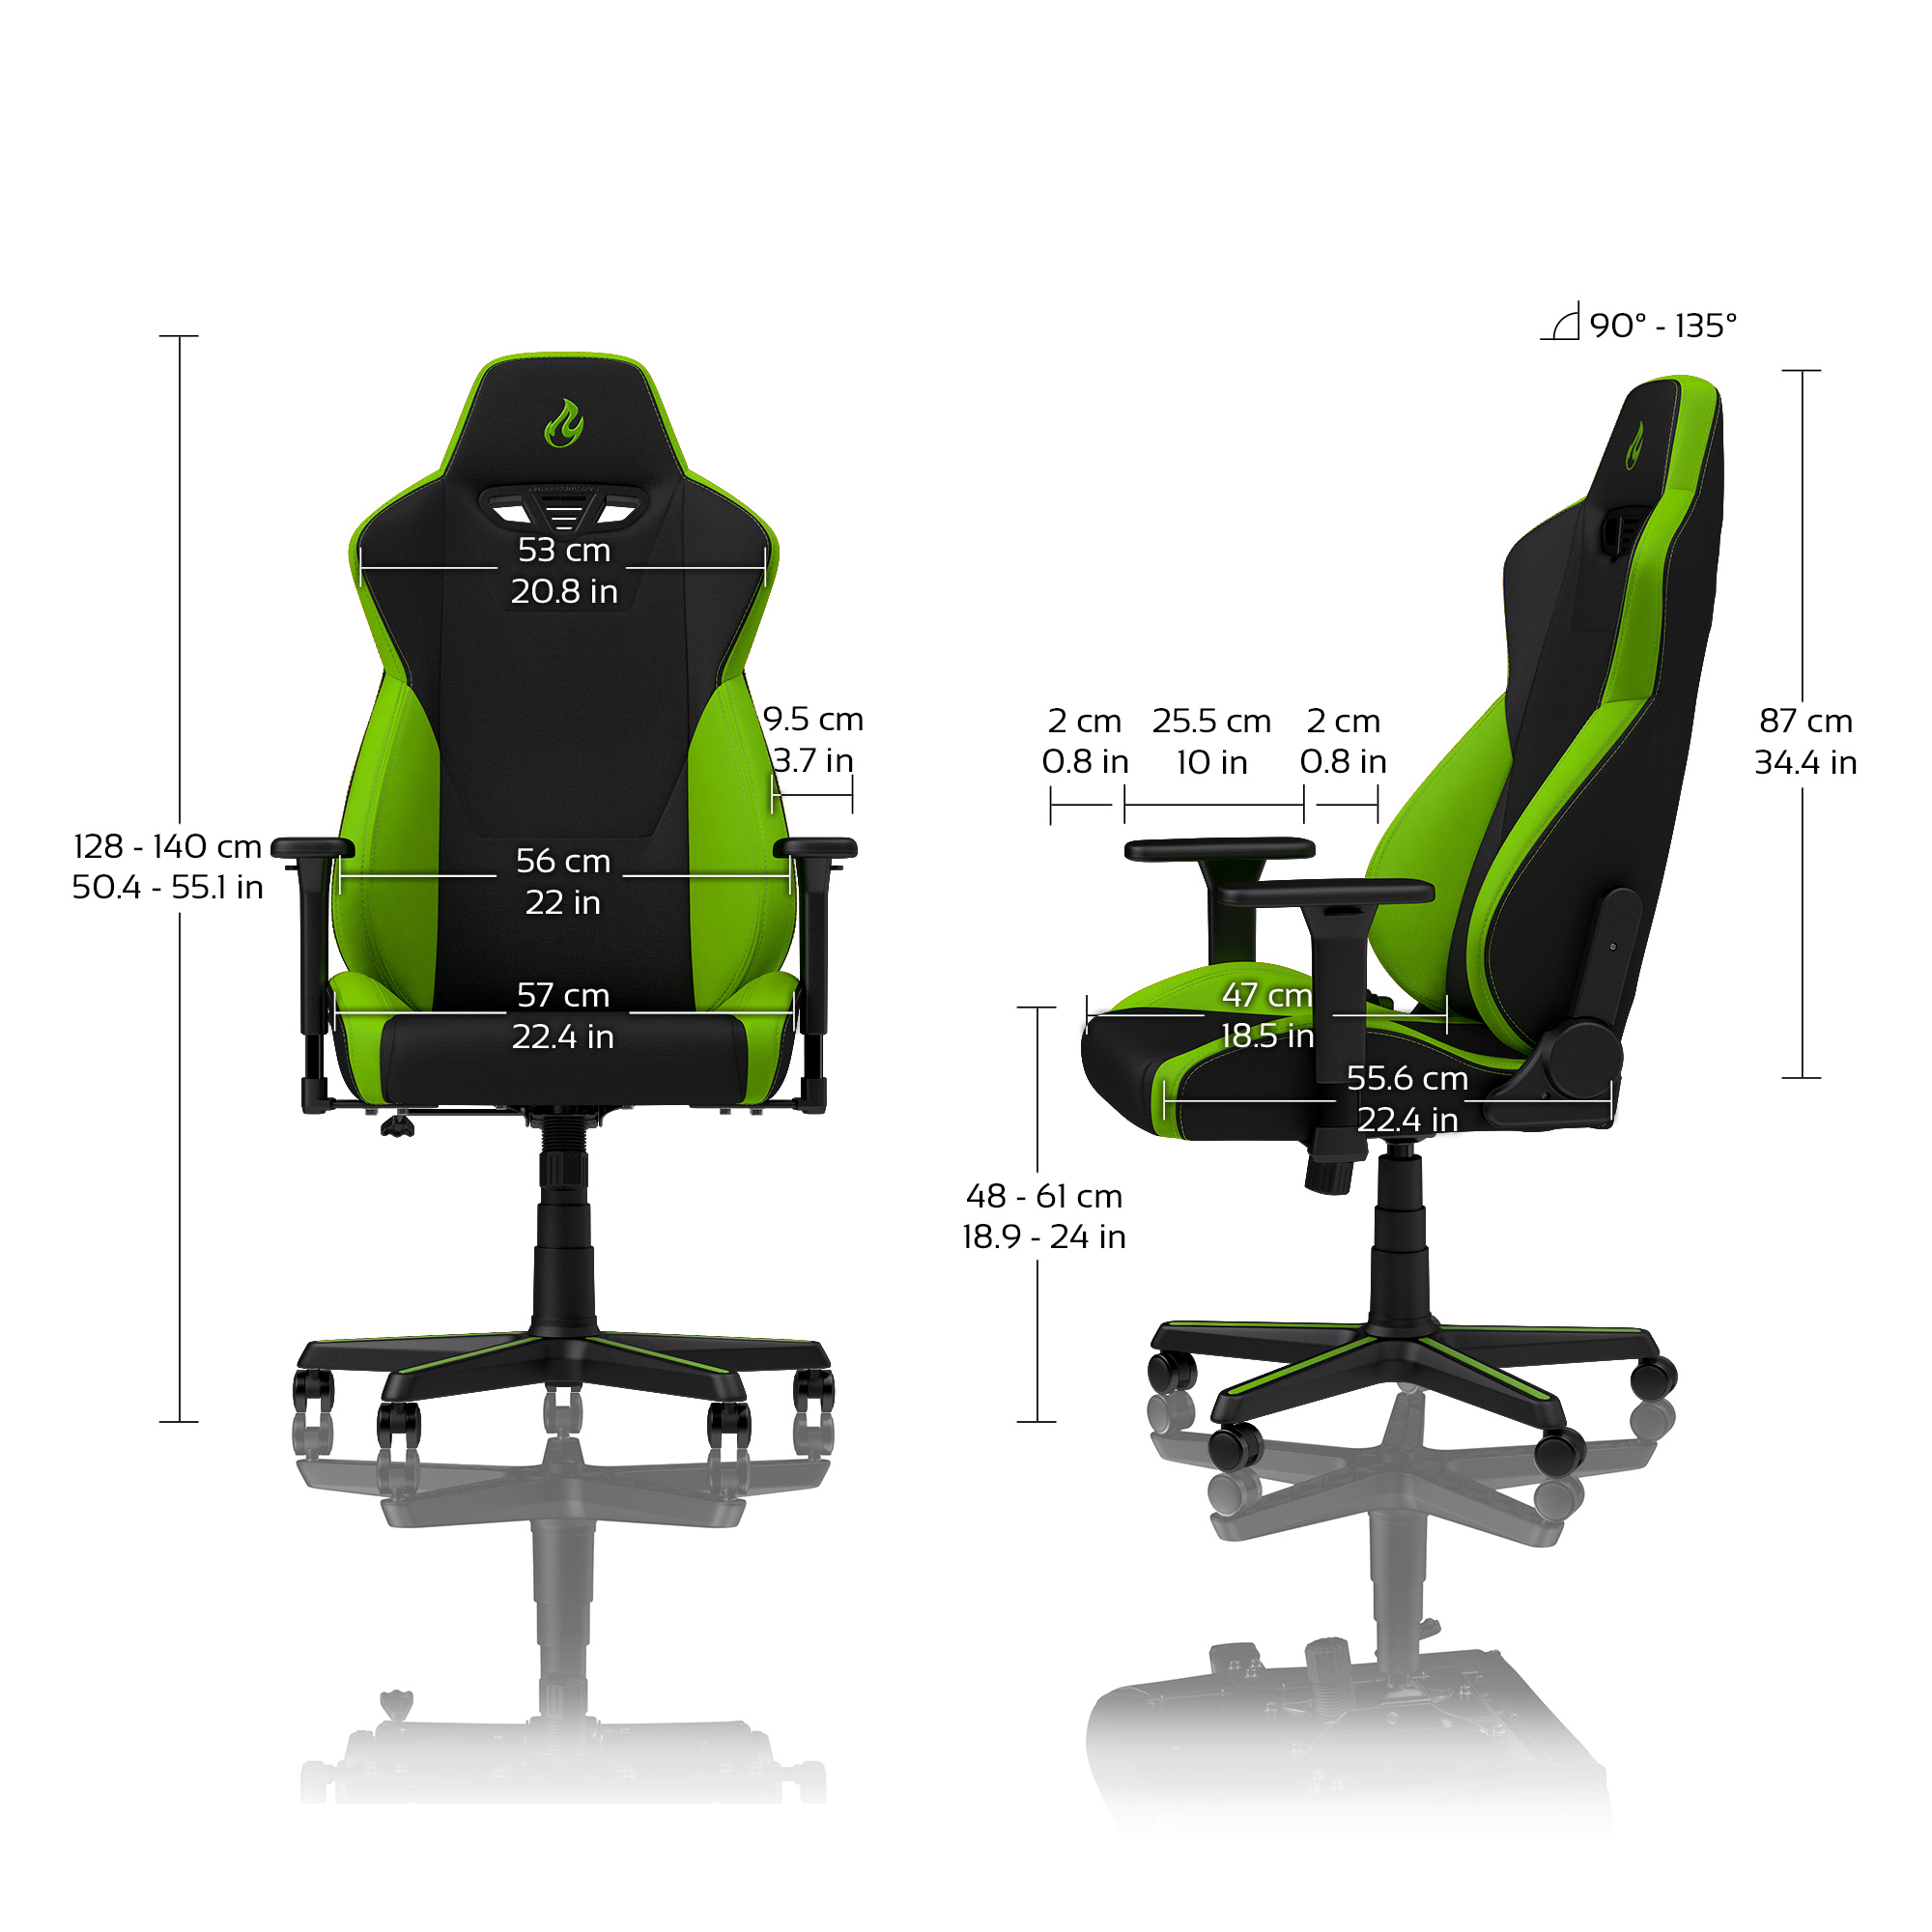 Nitro Concepts - Nitro Concepts S300 Fabric Gaming Chair - Atomic Green